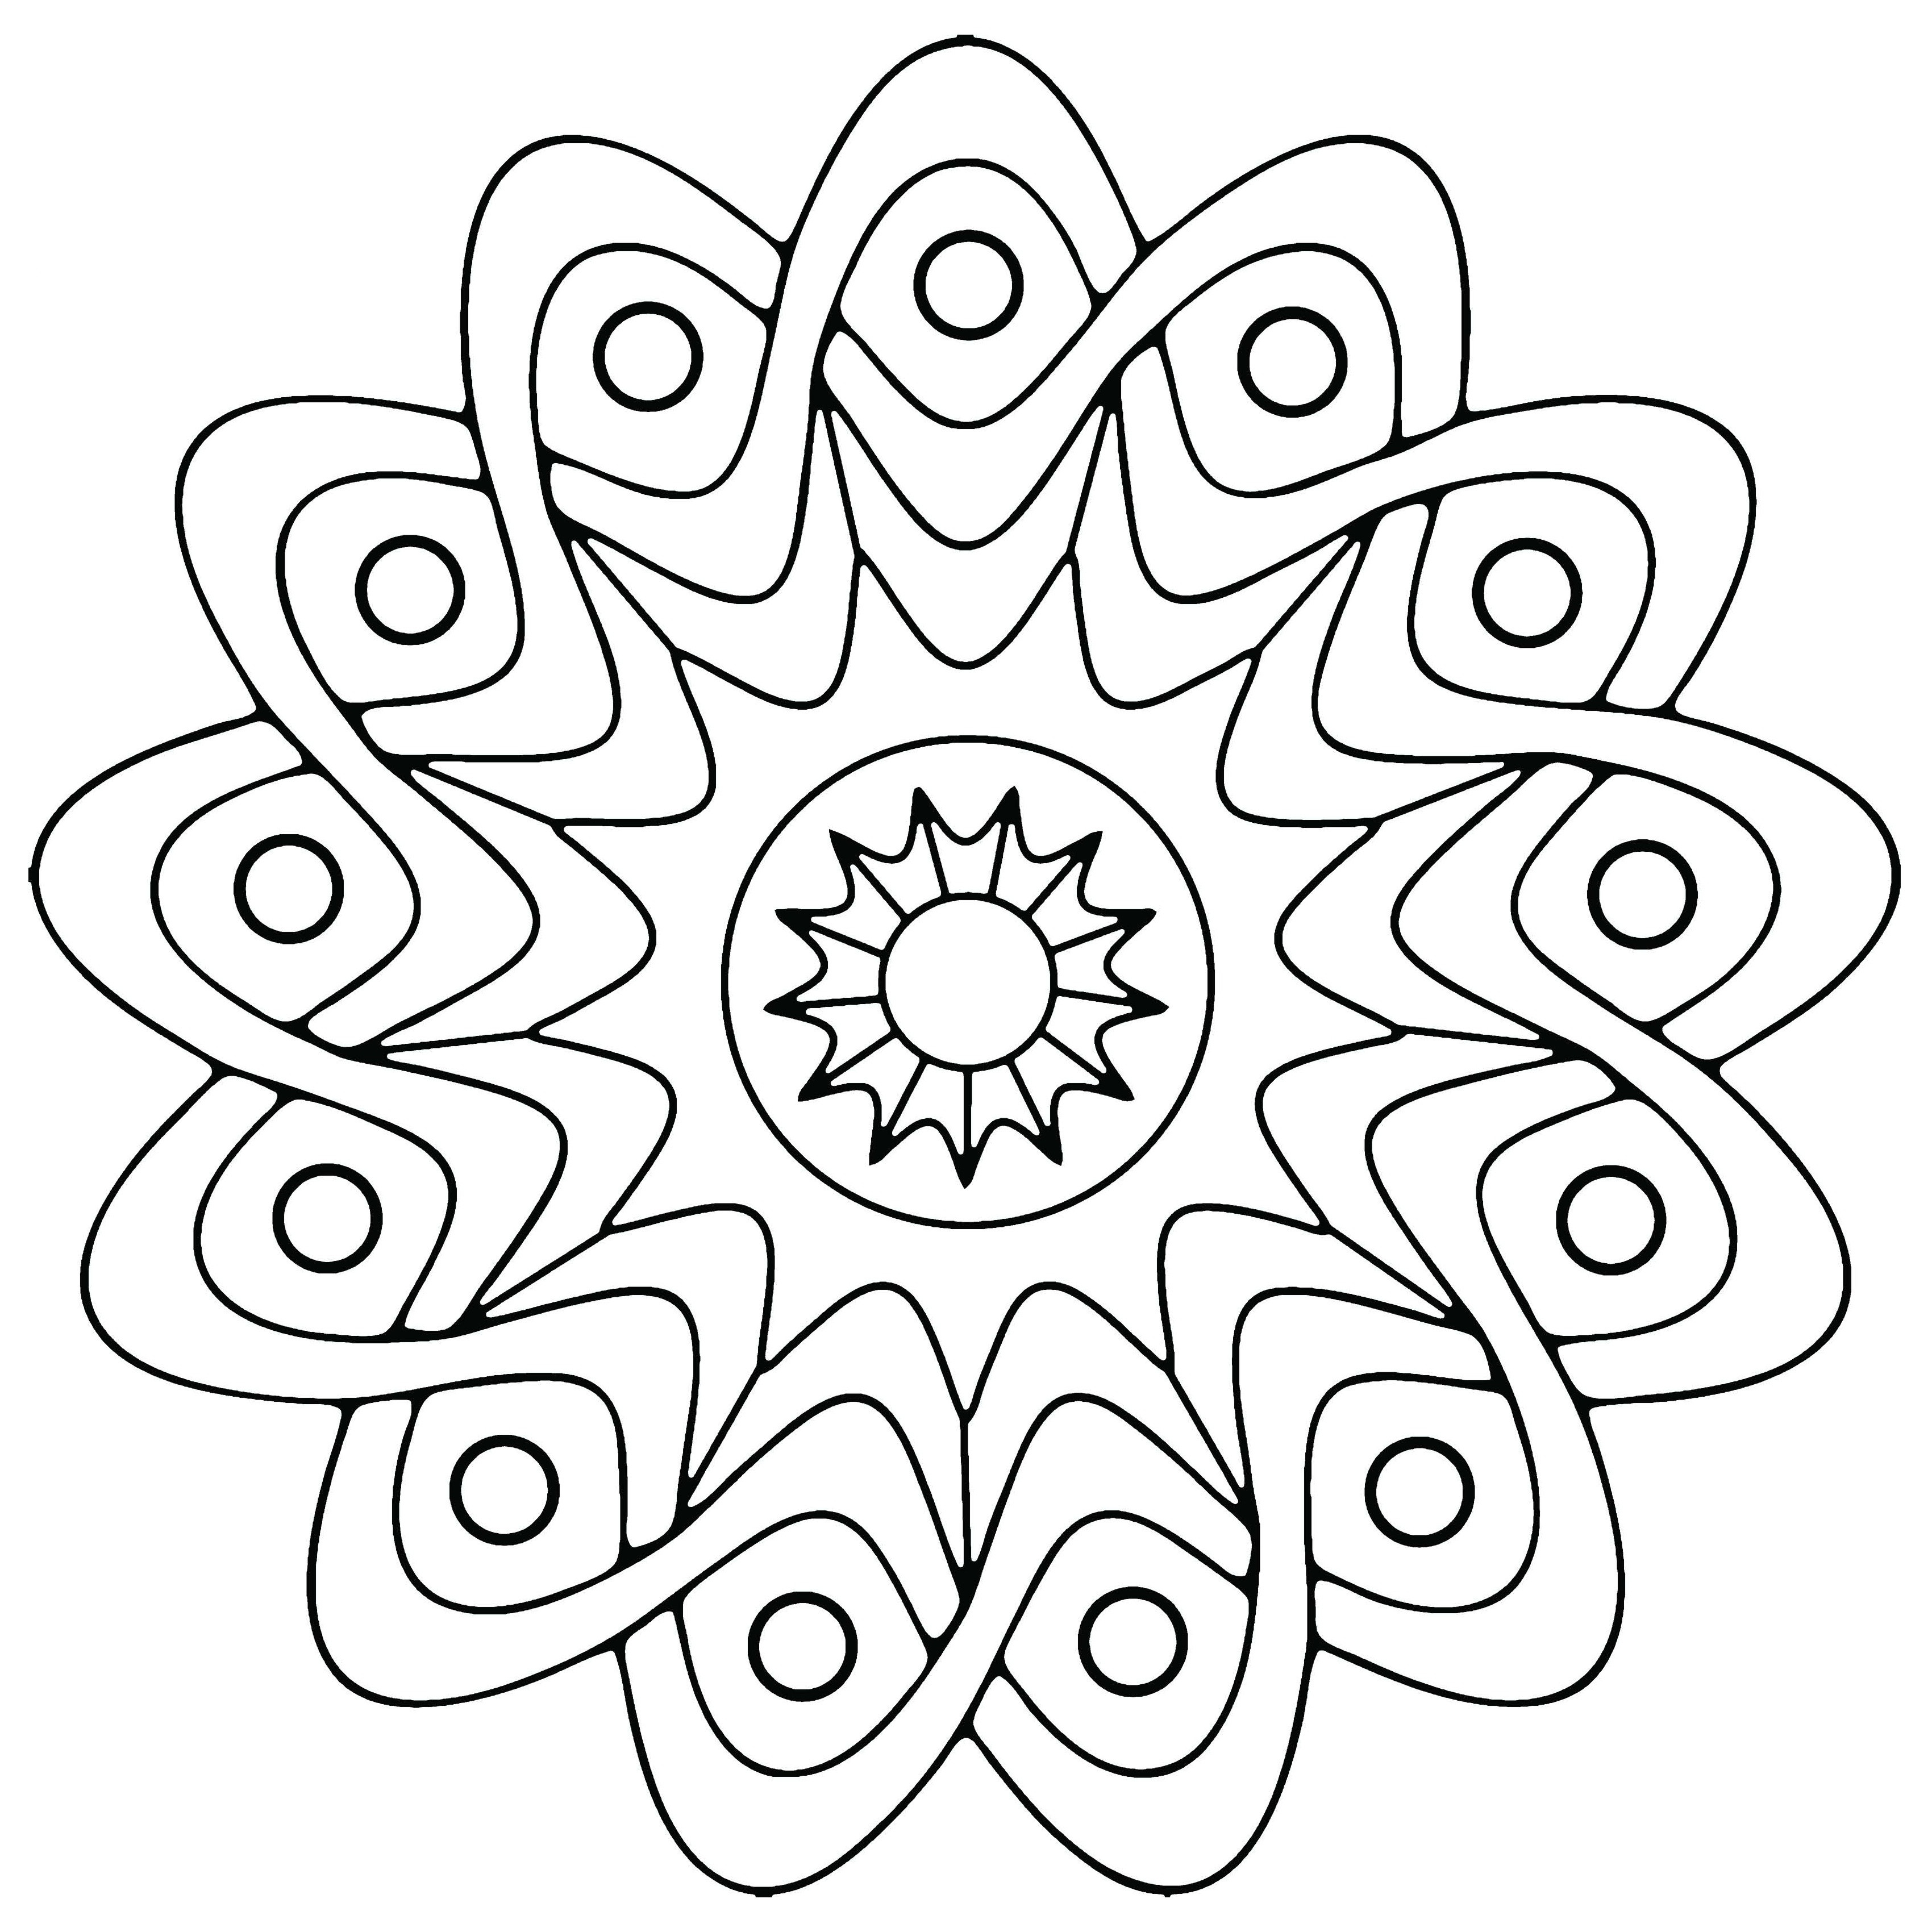 Coloring Pages For Adults Easy
 Free Printable Geometric Coloring Pages For Kids